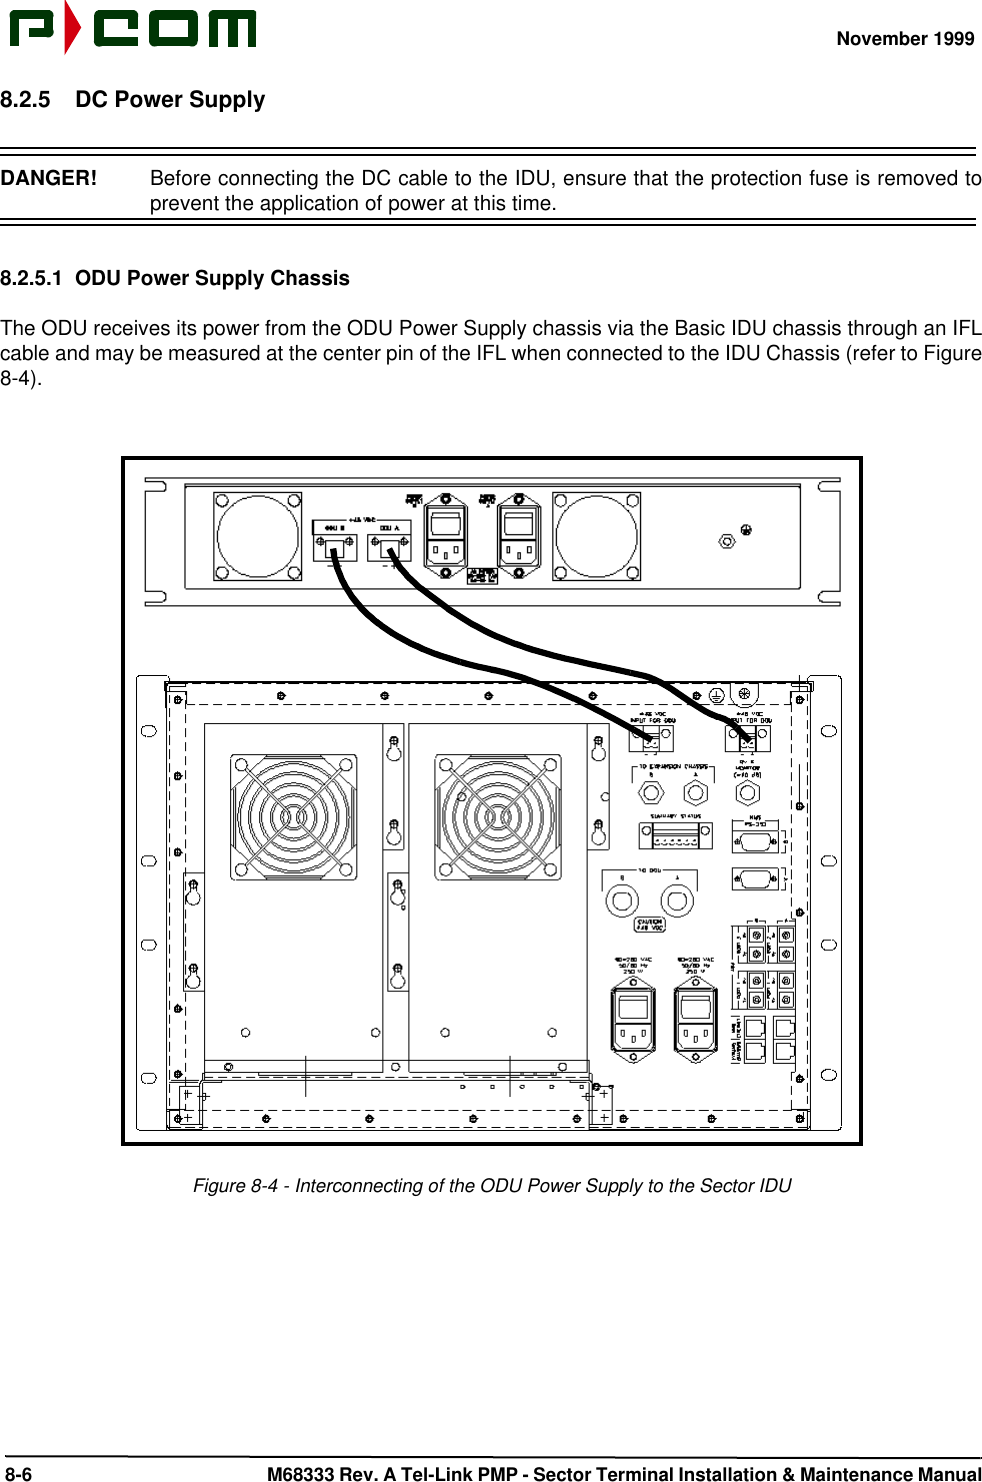 November 1999 8-6  M68333 Rev. A Tel-Link PMP - Sector Terminal Installation &amp; Maintenance Manual8.2.5 DC Power SupplyDANGER!  Before connecting the DC cable to the IDU, ensure that the protection fuse is removed toprevent the application of power at this time.8.2.5.1 ODU Power Supply ChassisThe ODU receives its power from the ODU Power Supply chassis via the Basic IDU chassis through an IFLcable and may be measured at the center pin of the IFL when connected to the IDU Chassis (refer to Figure8-4).Figure 8-4 - Interconnecting of the ODU Power Supply to the Sector IDU